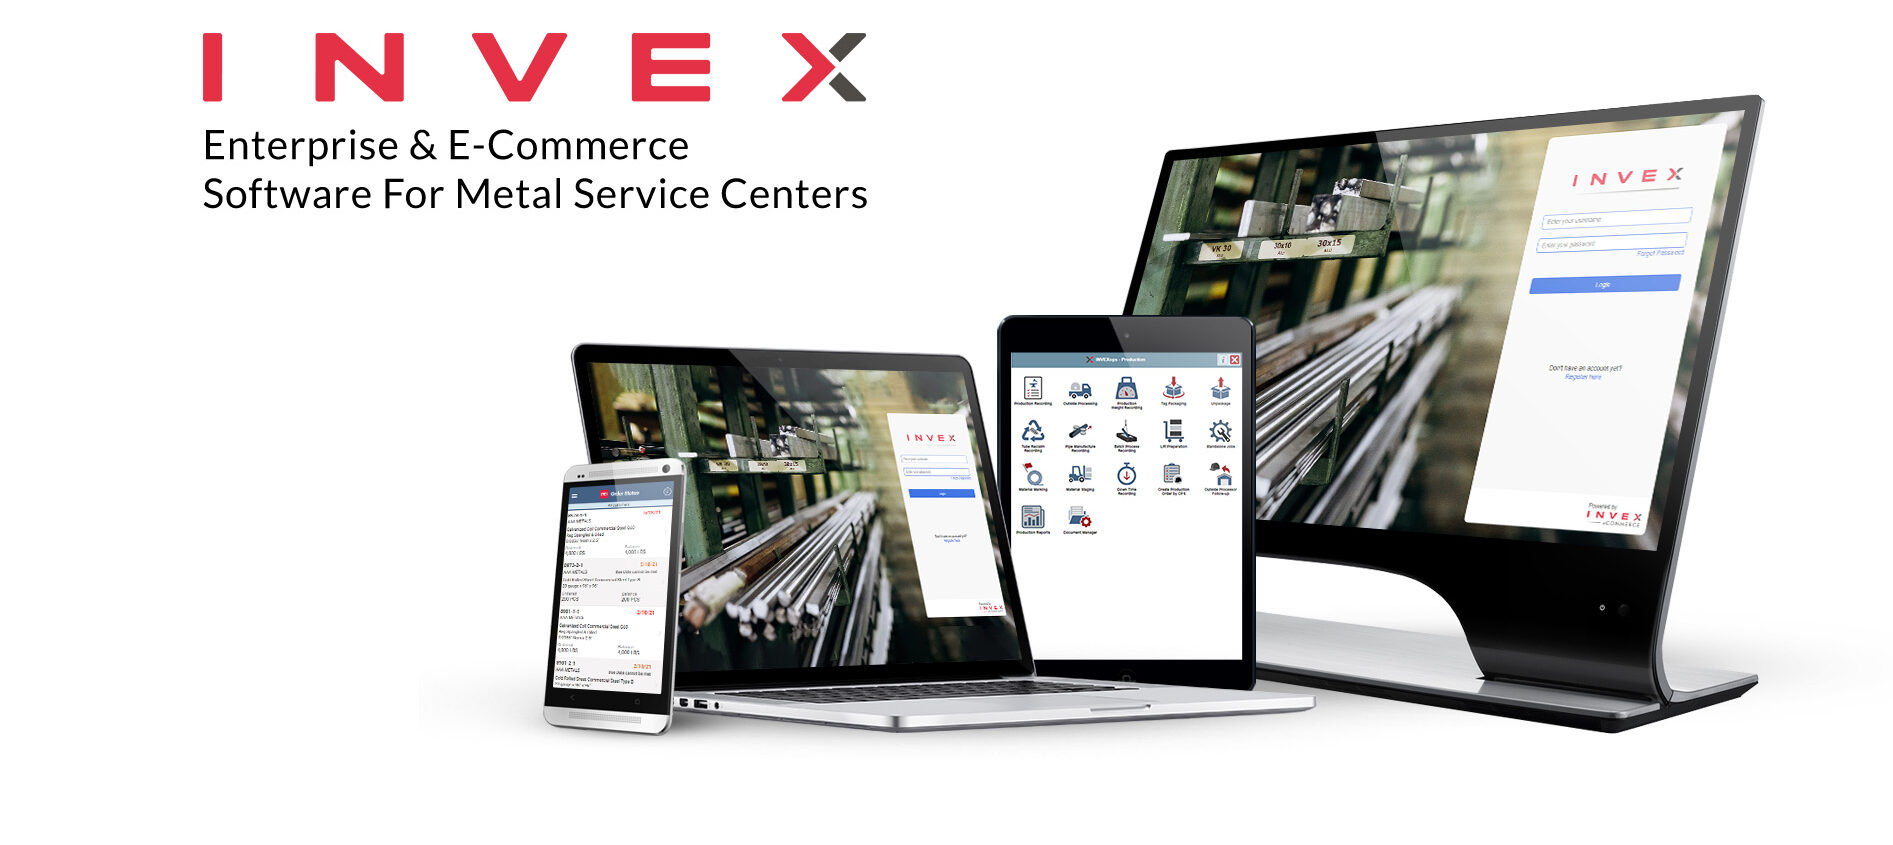 invex on multiple devices
